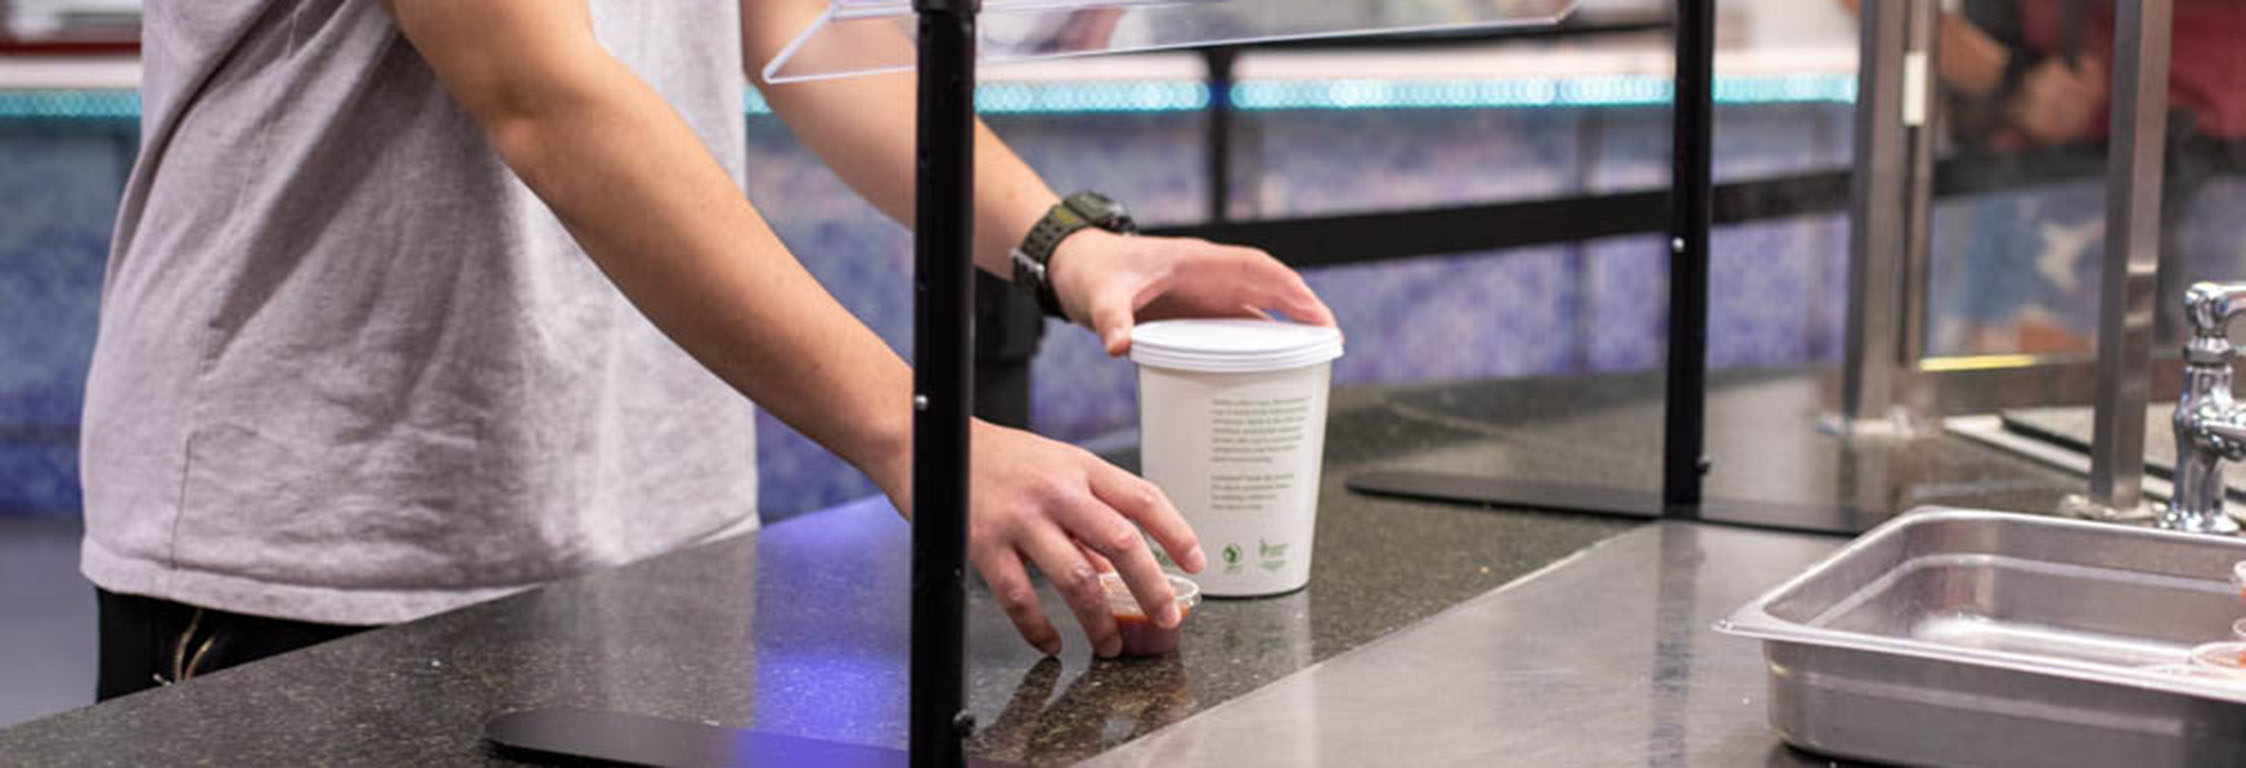 A student picks up a to-go container from a counter at Southside Cafe.